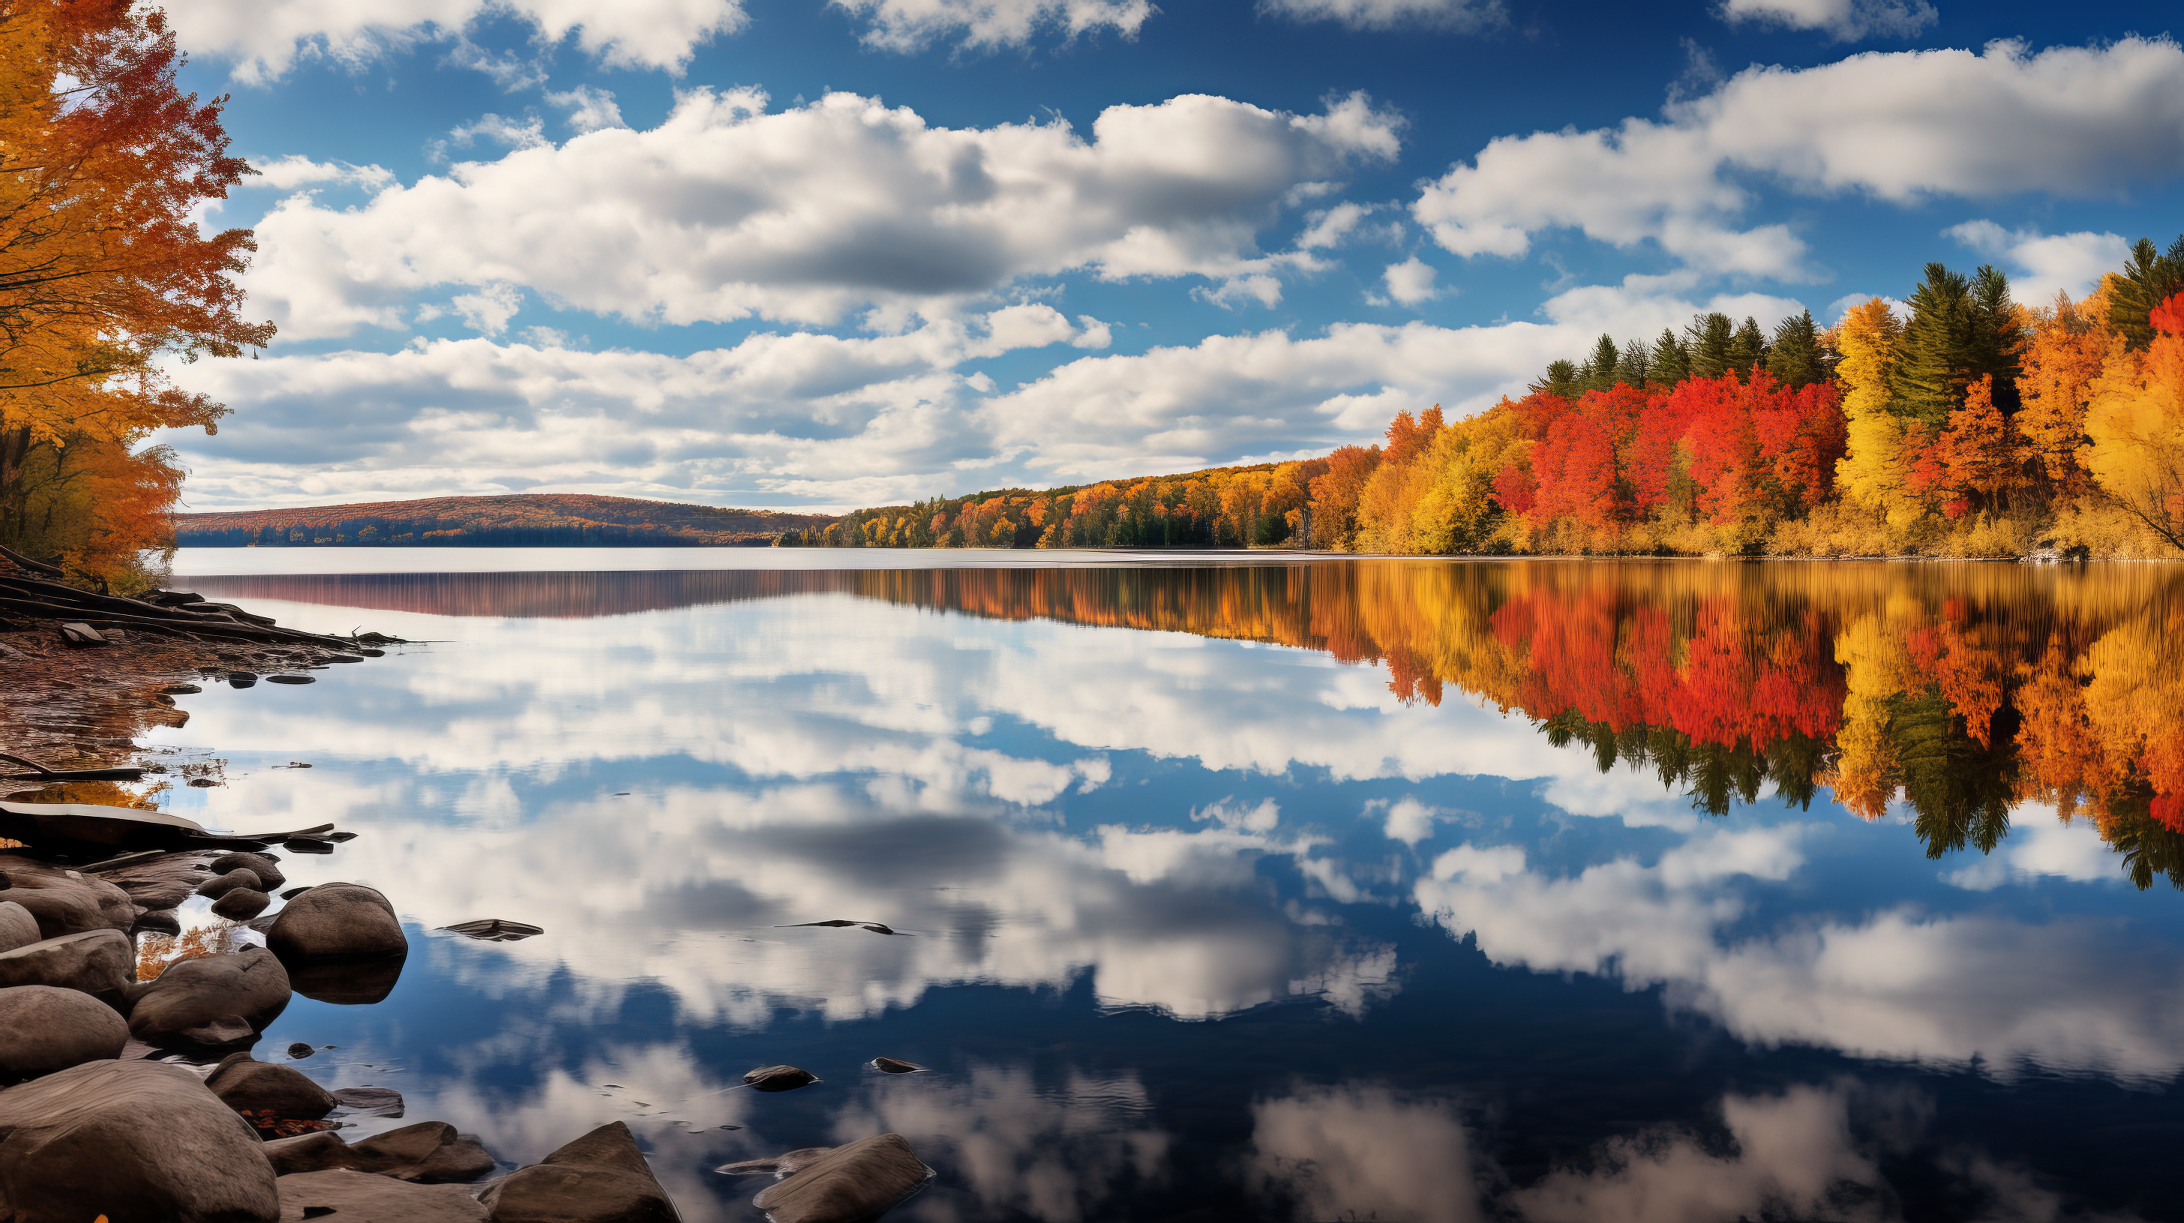 Serene Autumn Landscape With A Reflective Lake Wallpaper